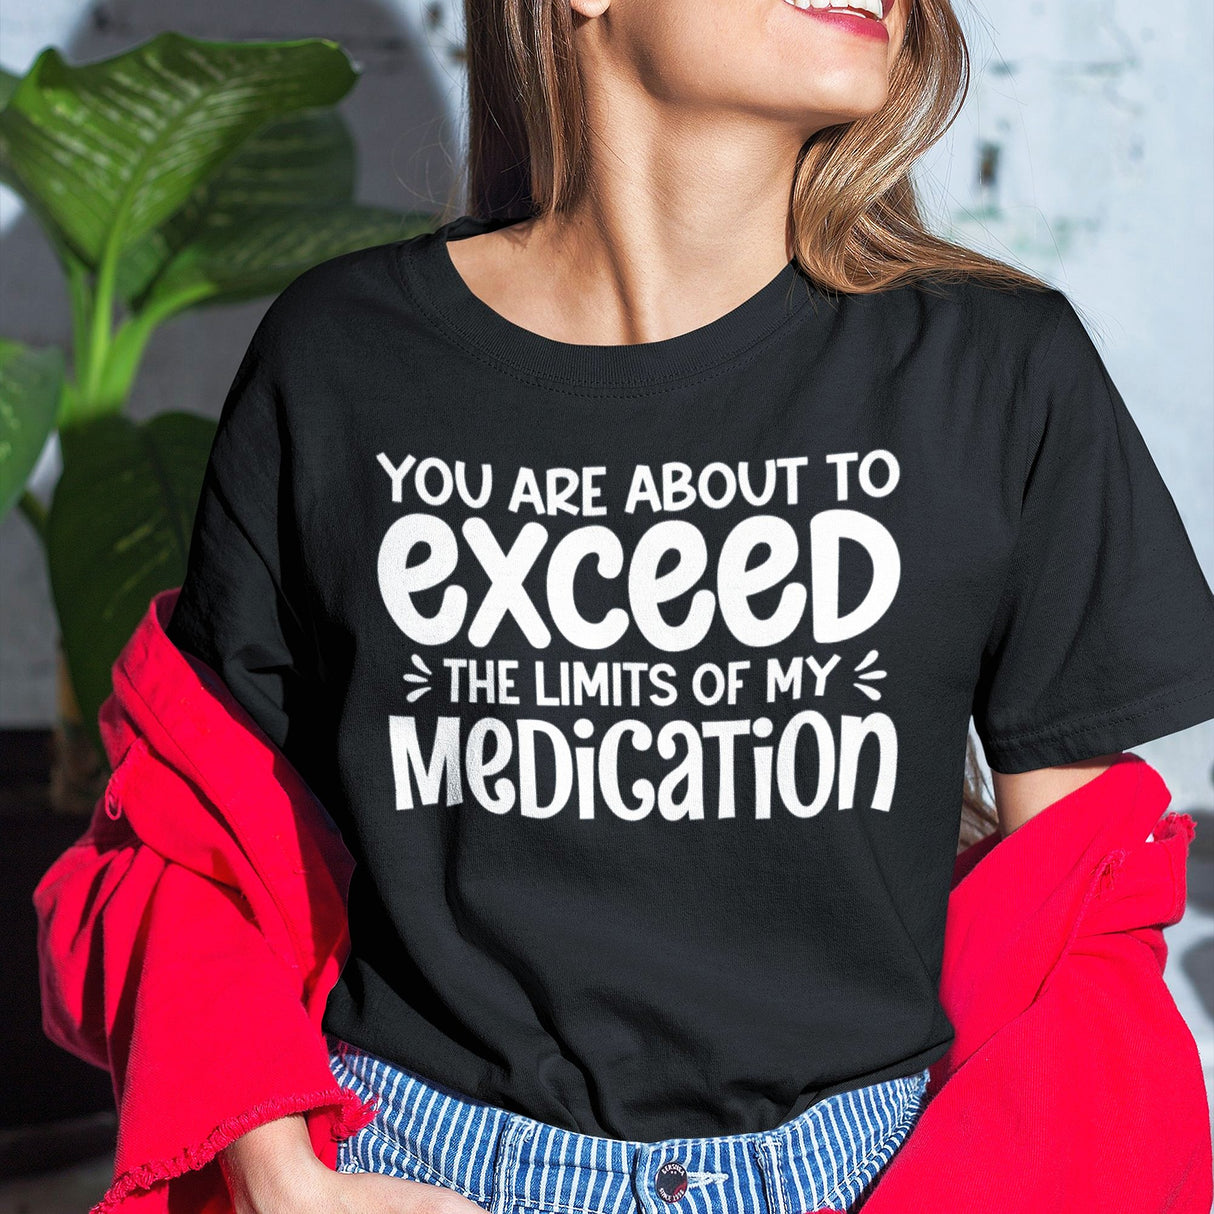 you-are-about-to-exceed-the-limits-of-my-medication-funny-tee-laughter-t-shirt-humor-tee-comedy-t-shirt-hilarious-tee#color_black